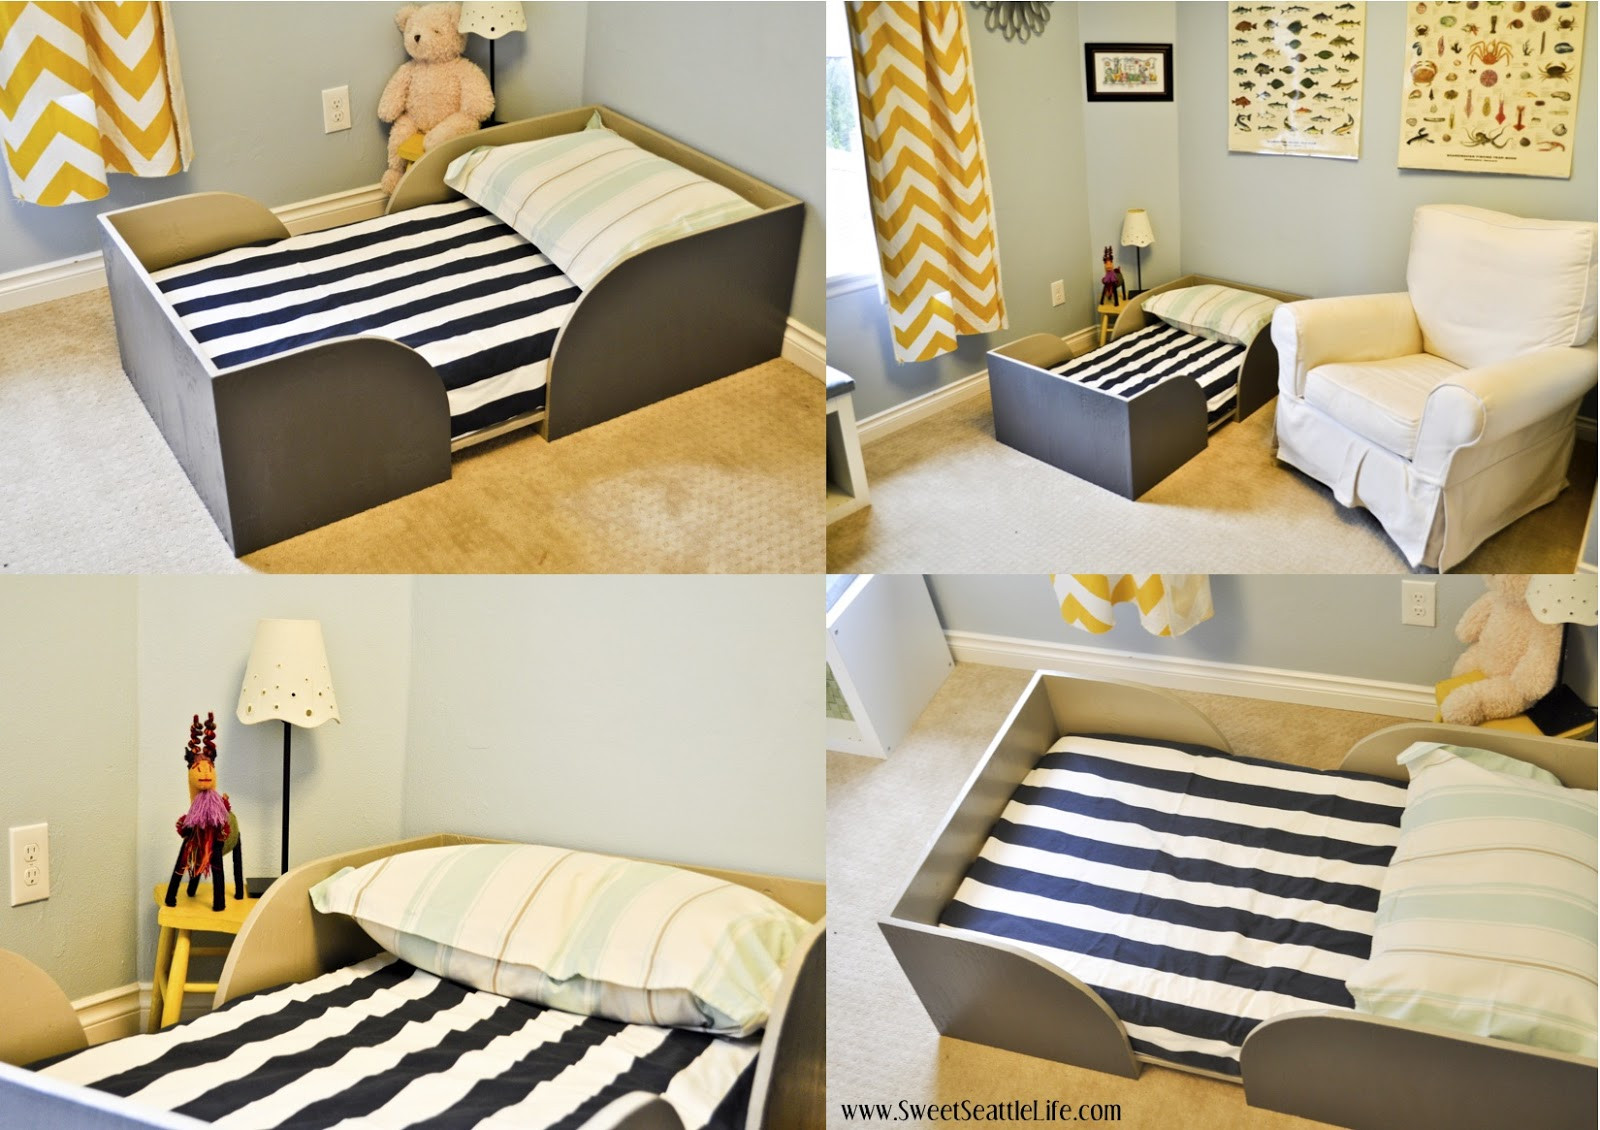 Toddler Bed DIY
 Chris and Sonja The Sweet Seattle Life DIY Toddler Bed